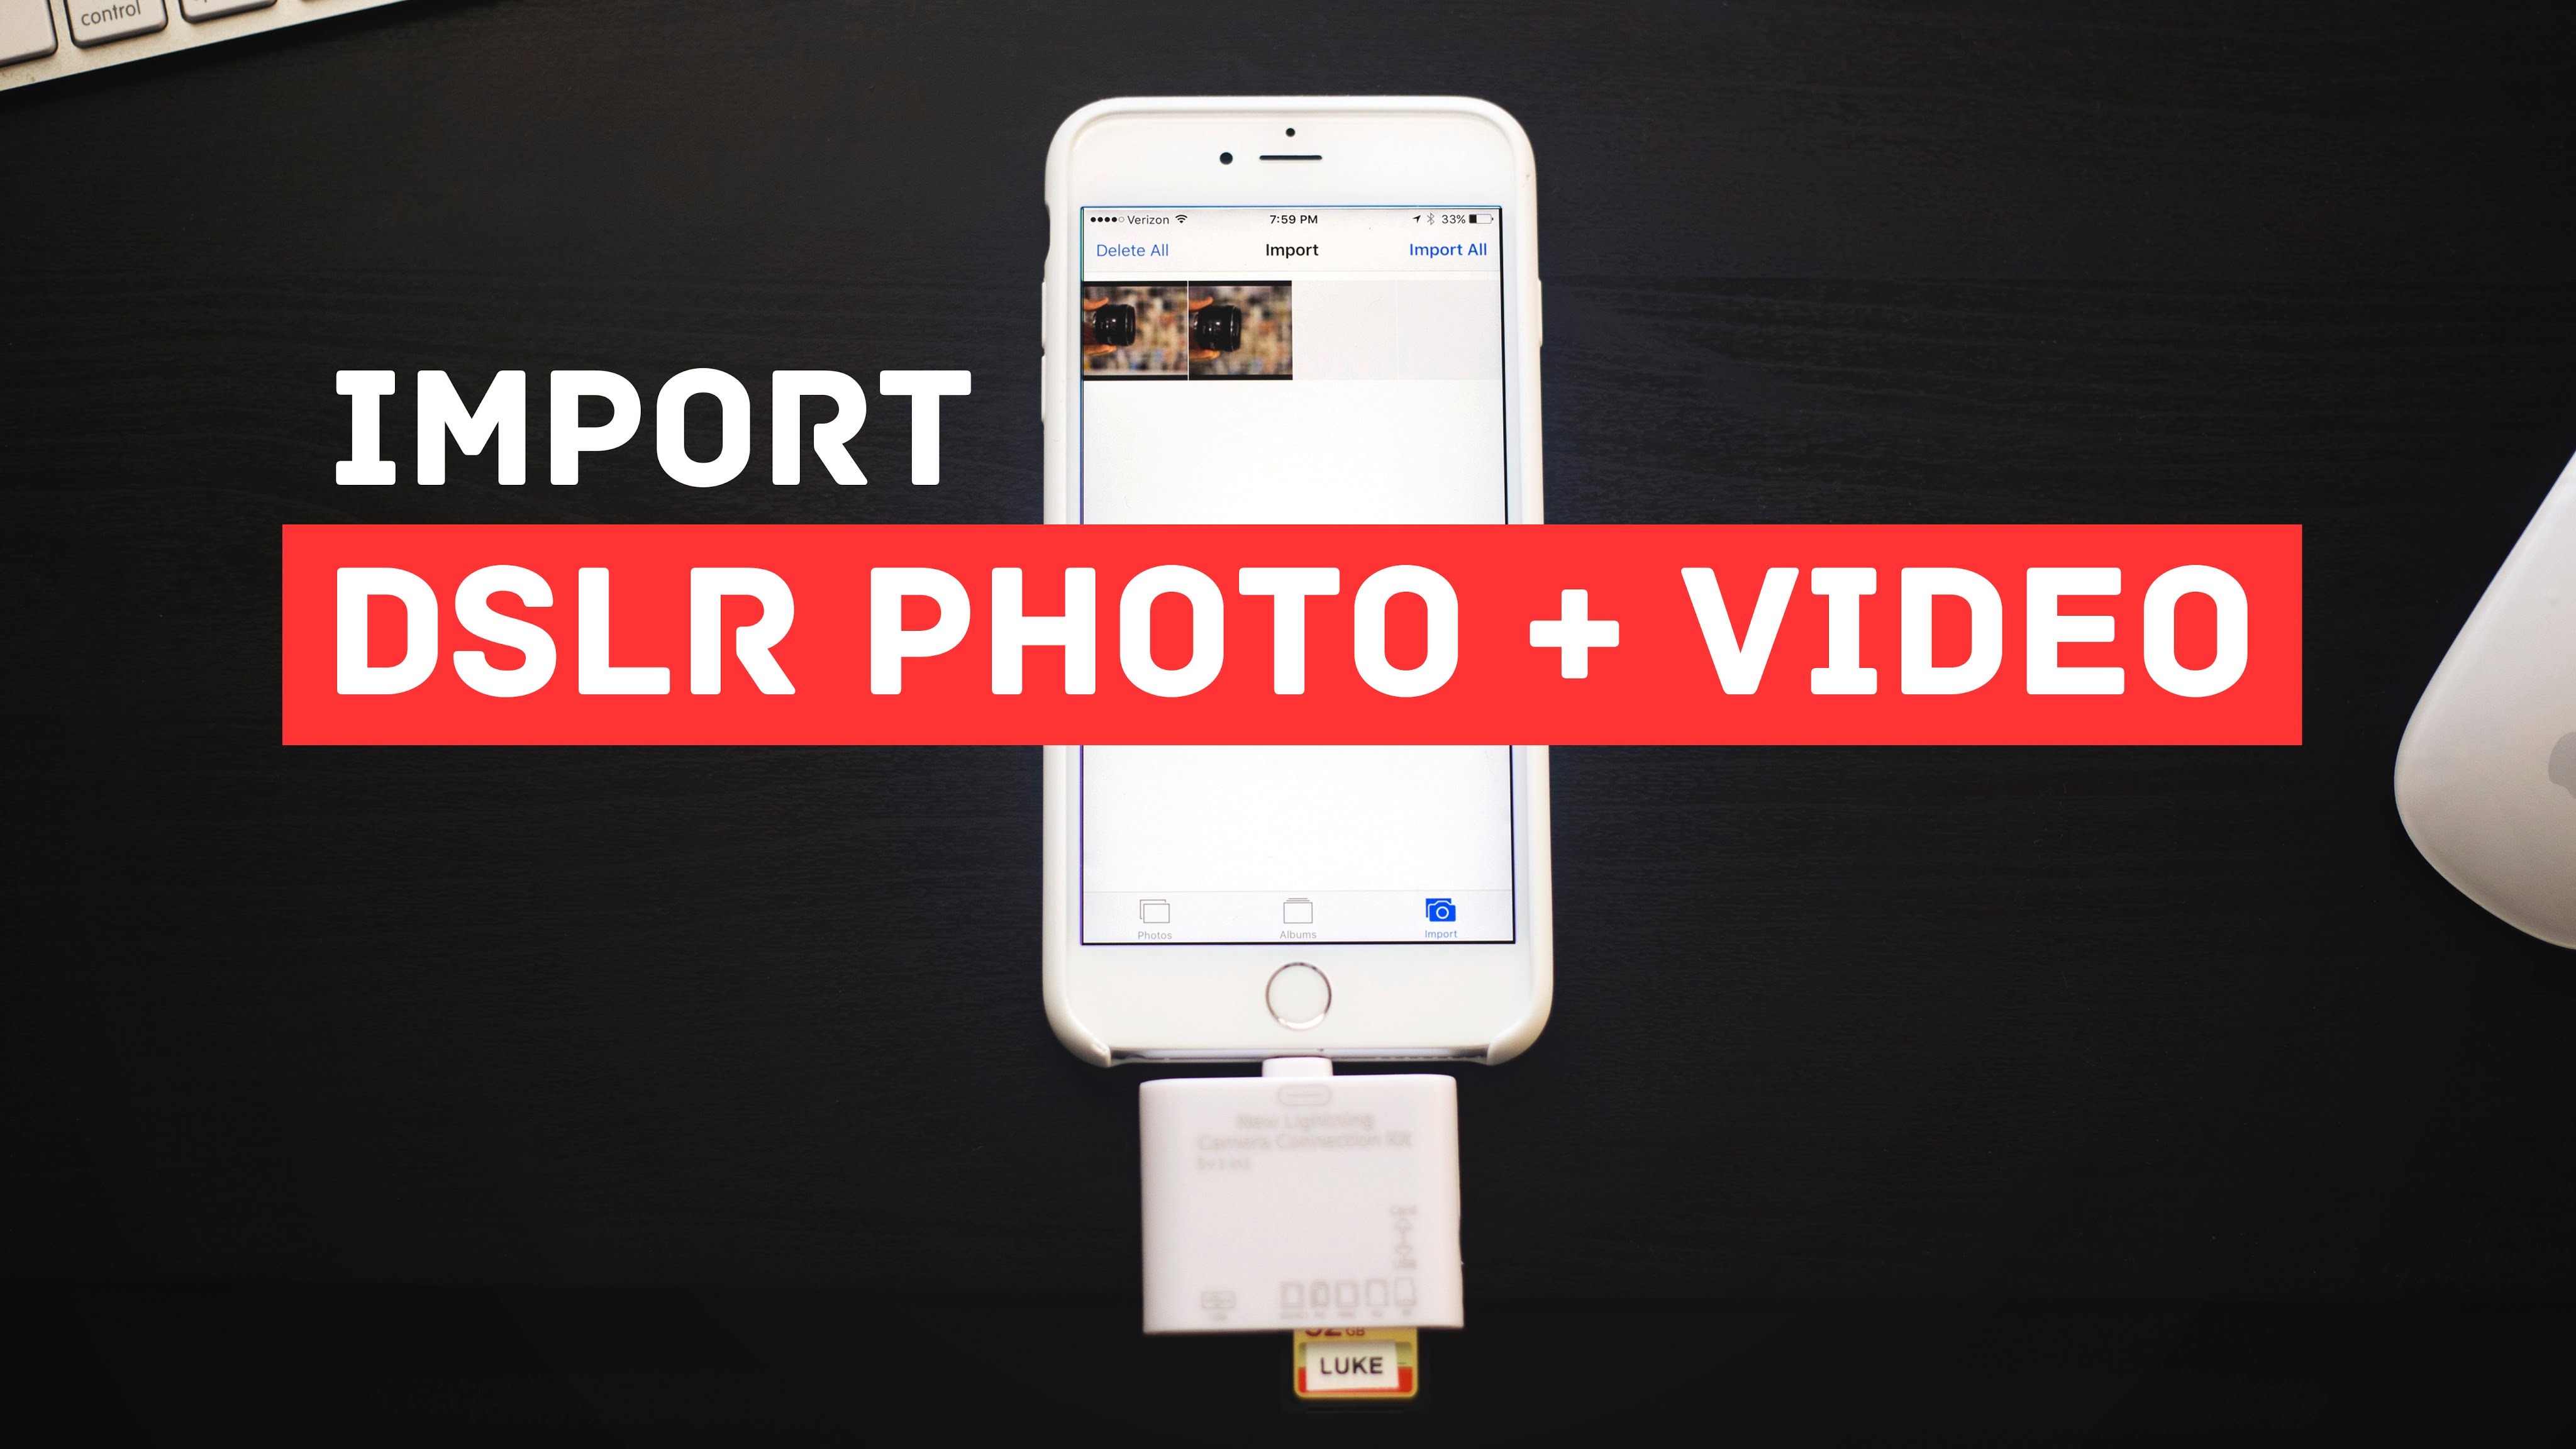 How to Import DSLR Photos + Videos into iPhone